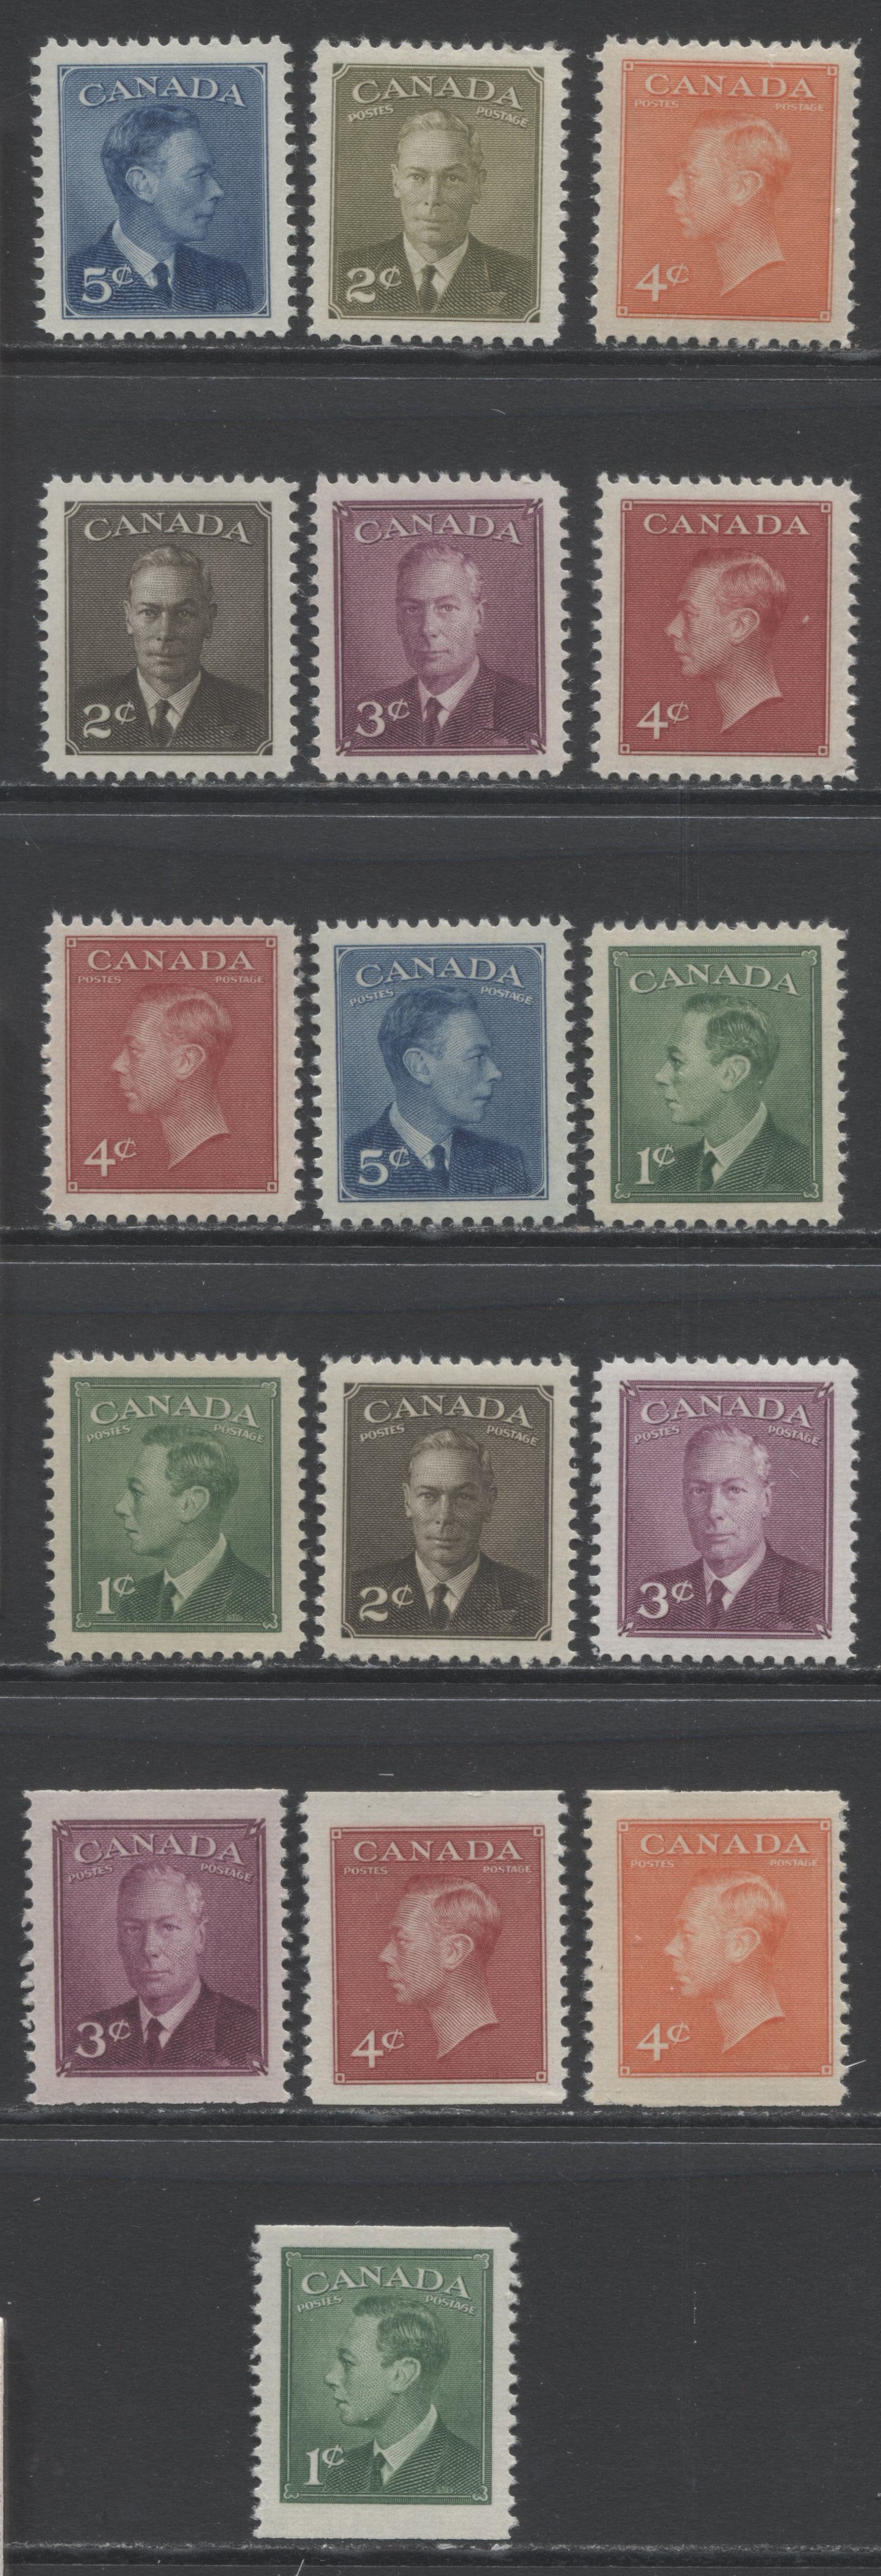 Lot 294 Canada #284-288, 284as/306as, 289-293, 305-306 1c - 5c Green - Deep Blue King George VI, 1949-1951 Postes-Postage, Omitted Postes-Postage & New Colors Postes-Postage Issues, 16 F/VFNH Sheet & Booklet Singles